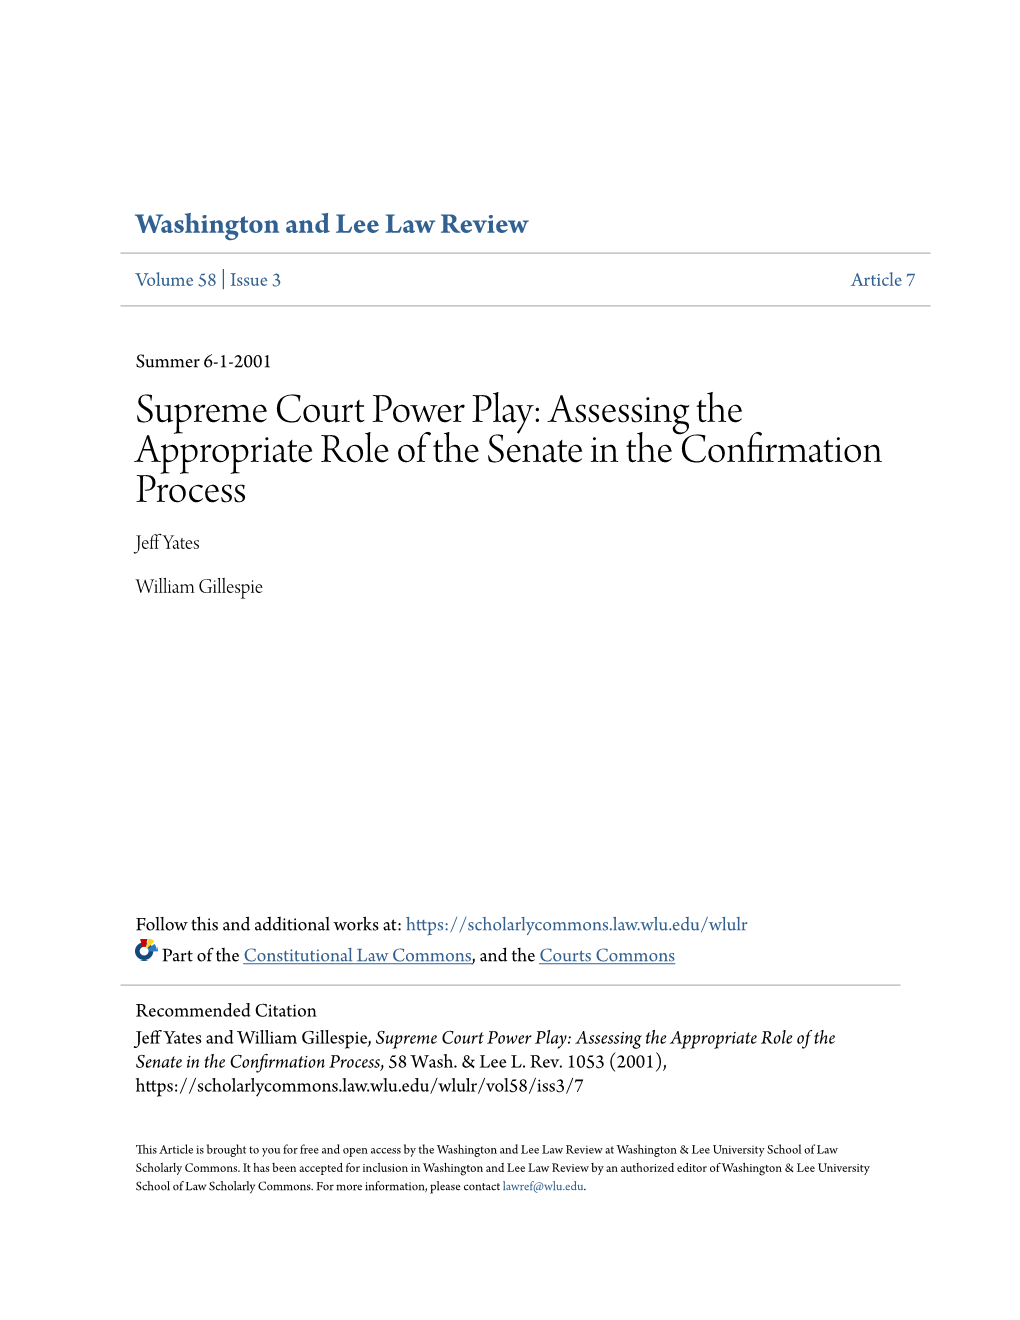 Supreme Court Power Play: Assessing the Appropriate Role of the Senate in the Confirmation Process Jeff Ay Tes